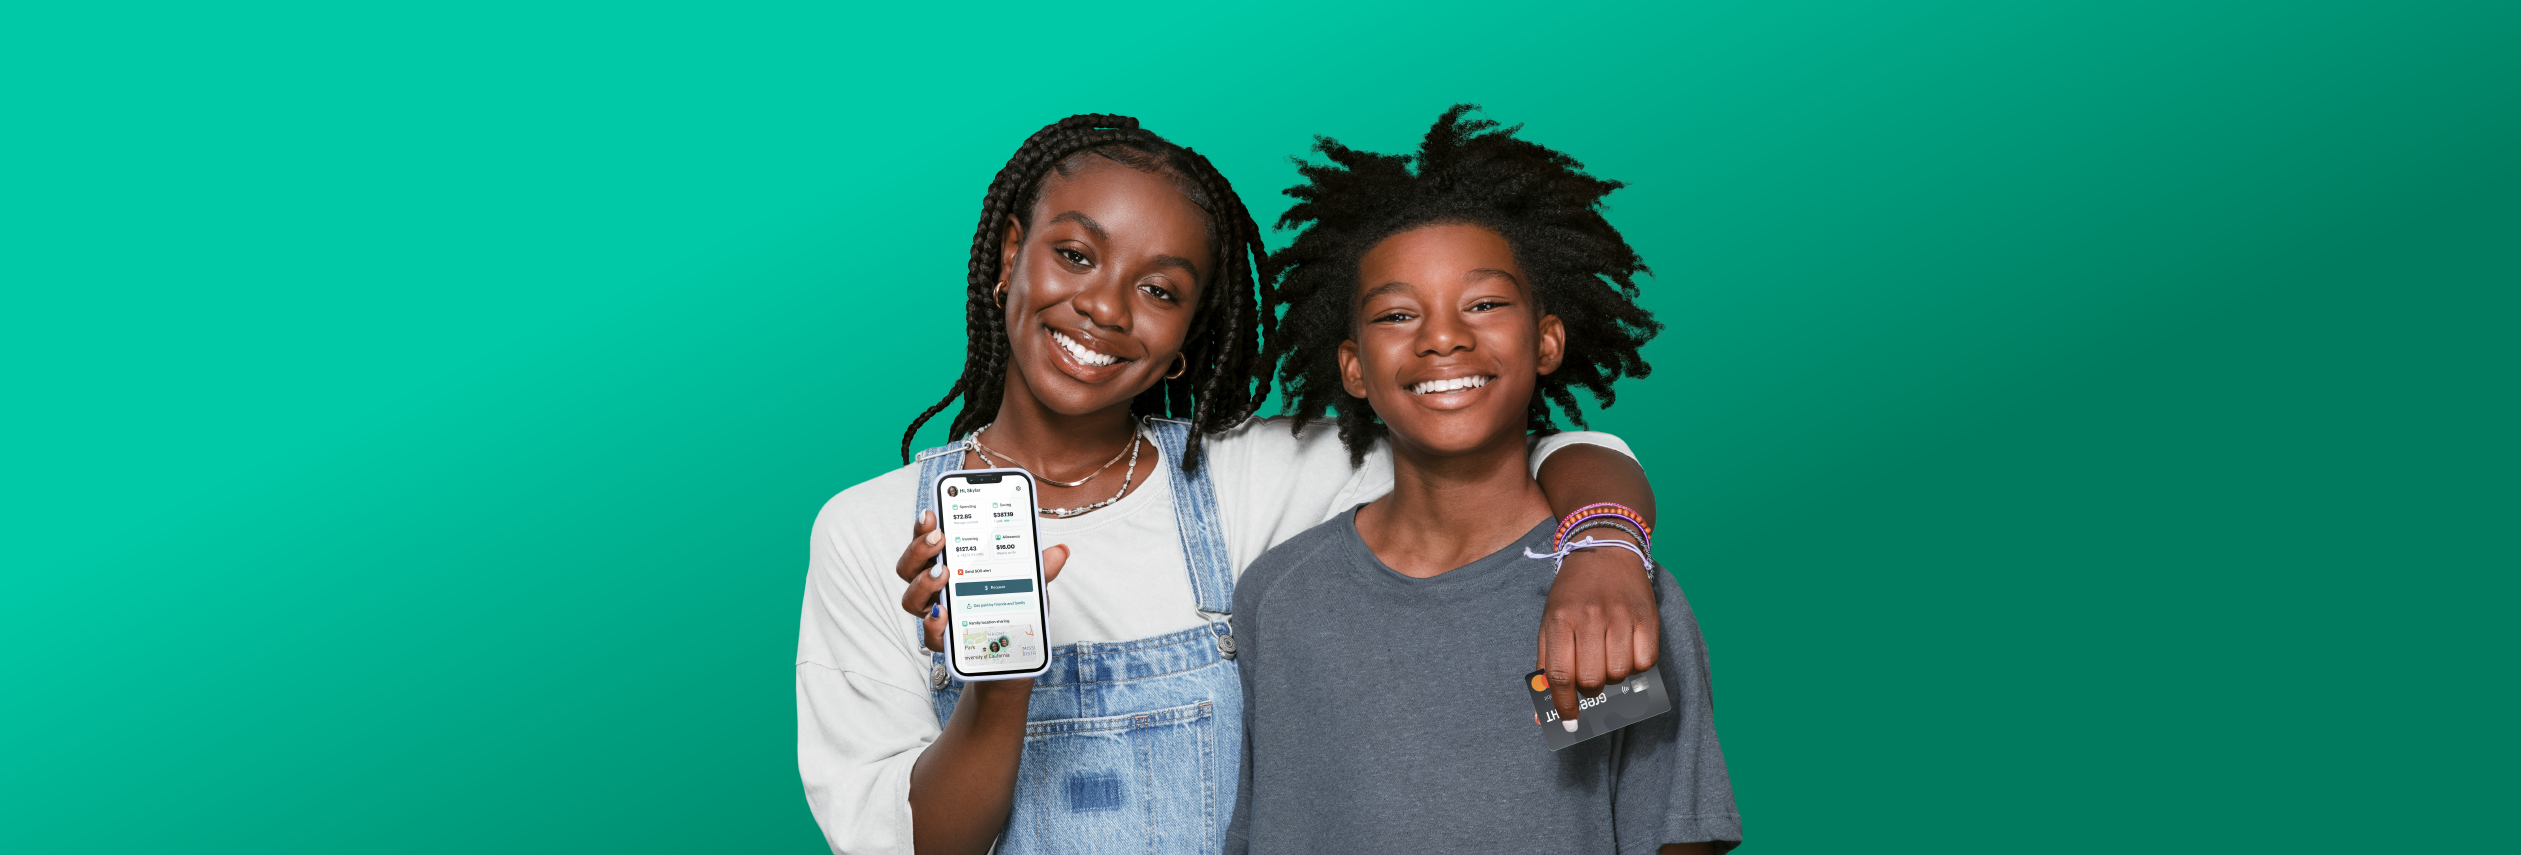 Introducing Greenlight: The debit card and app for kids and teens!